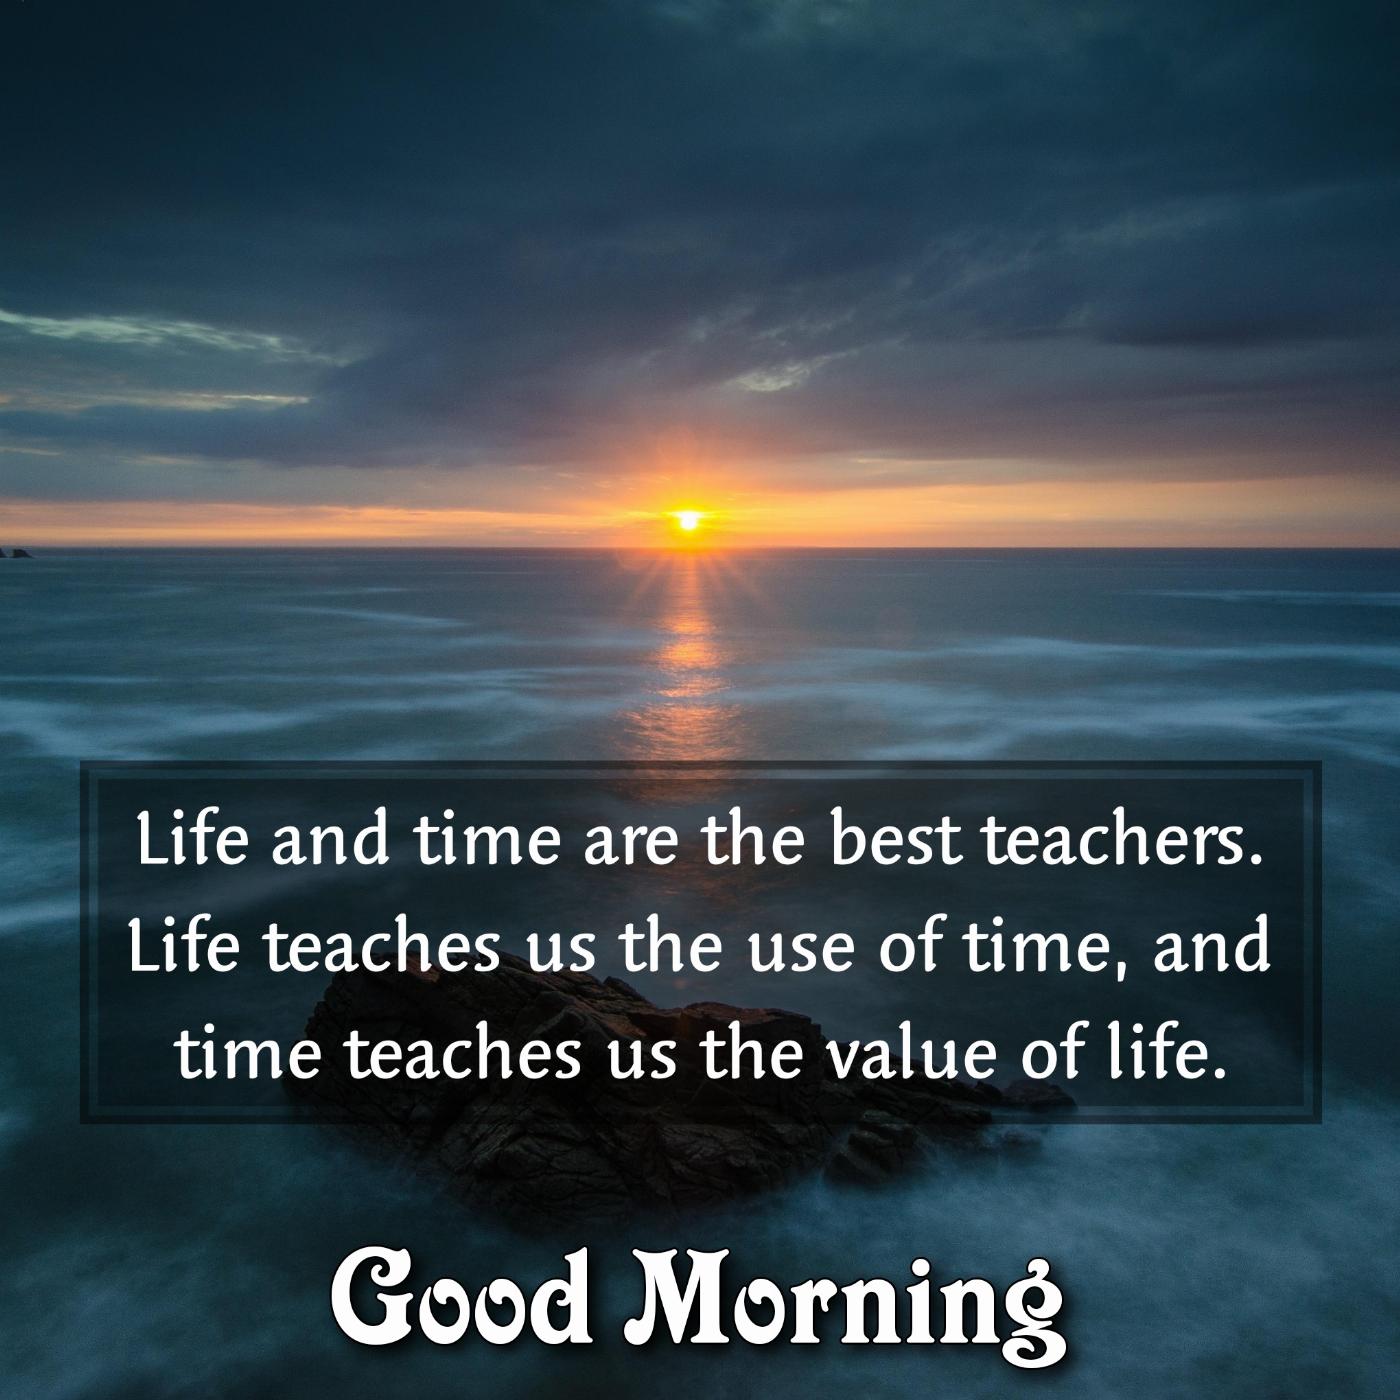 Life and time are the best teachers